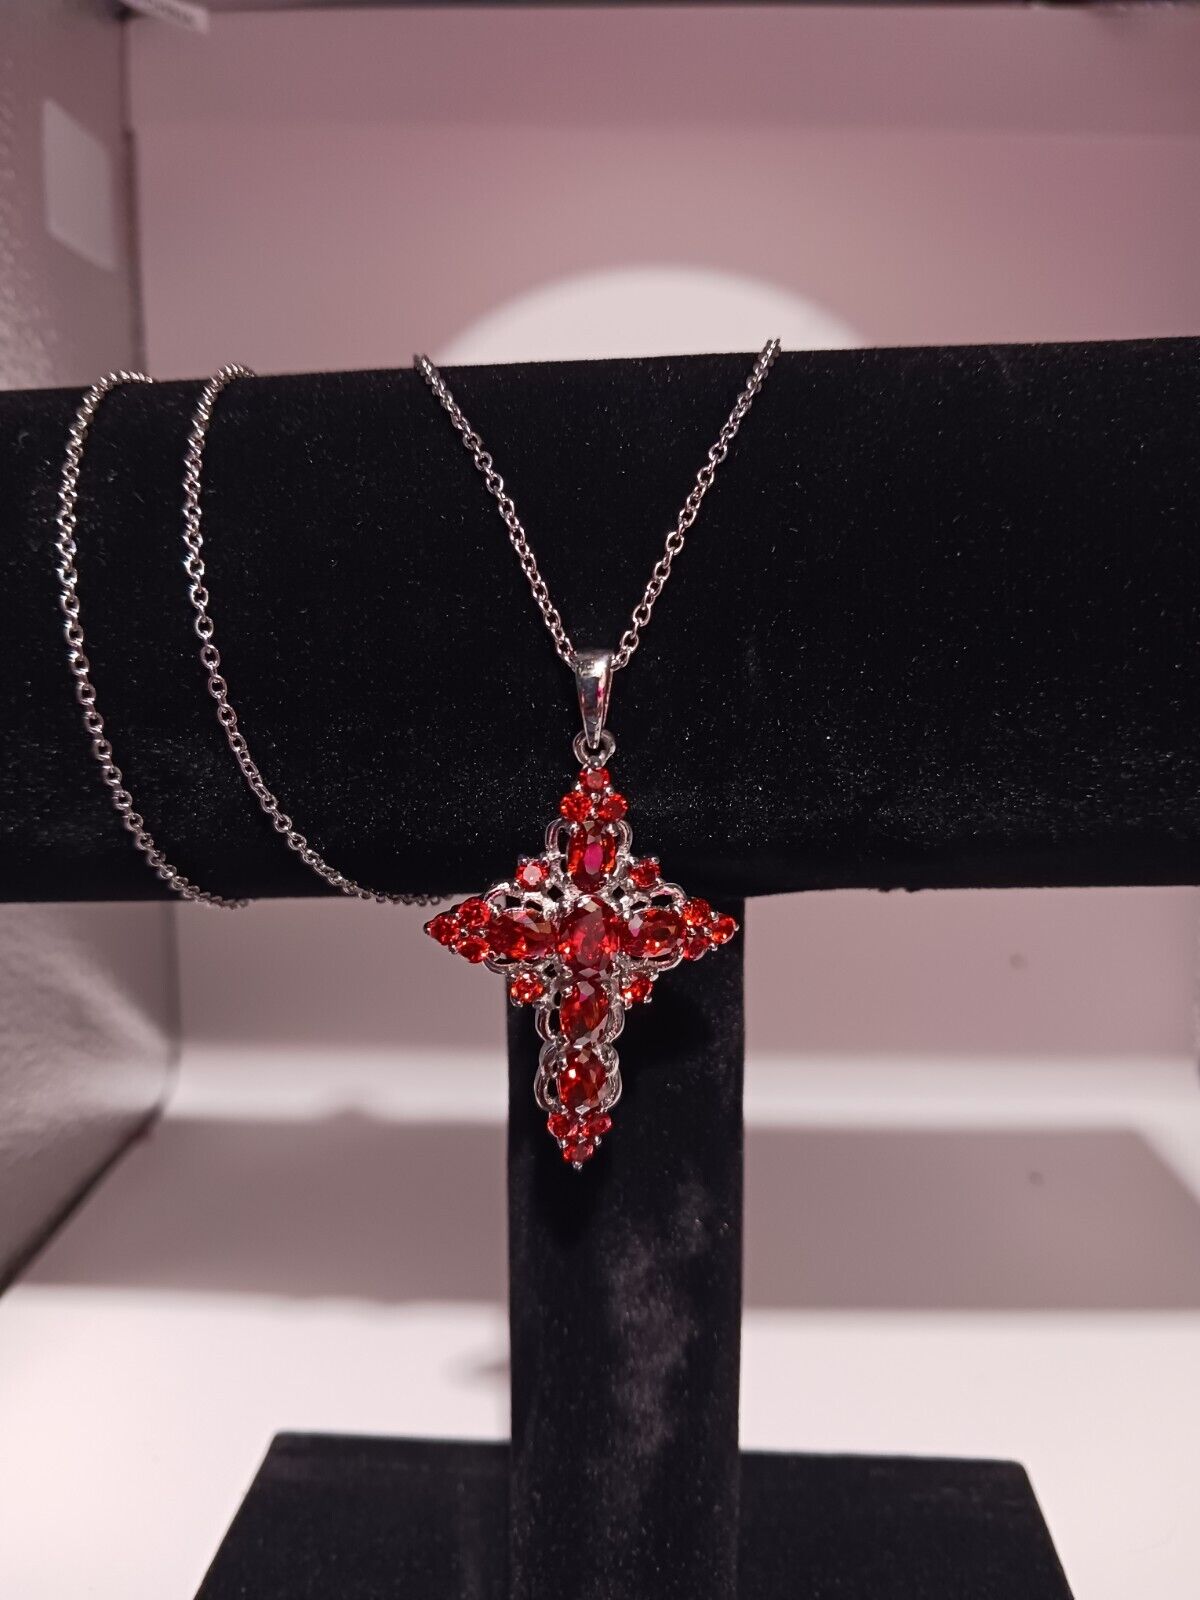 STAINLESS STEEL  SIMULATED  GARNET(cz)  CROSS PENDANT WITH 20 INCH  CHAIN